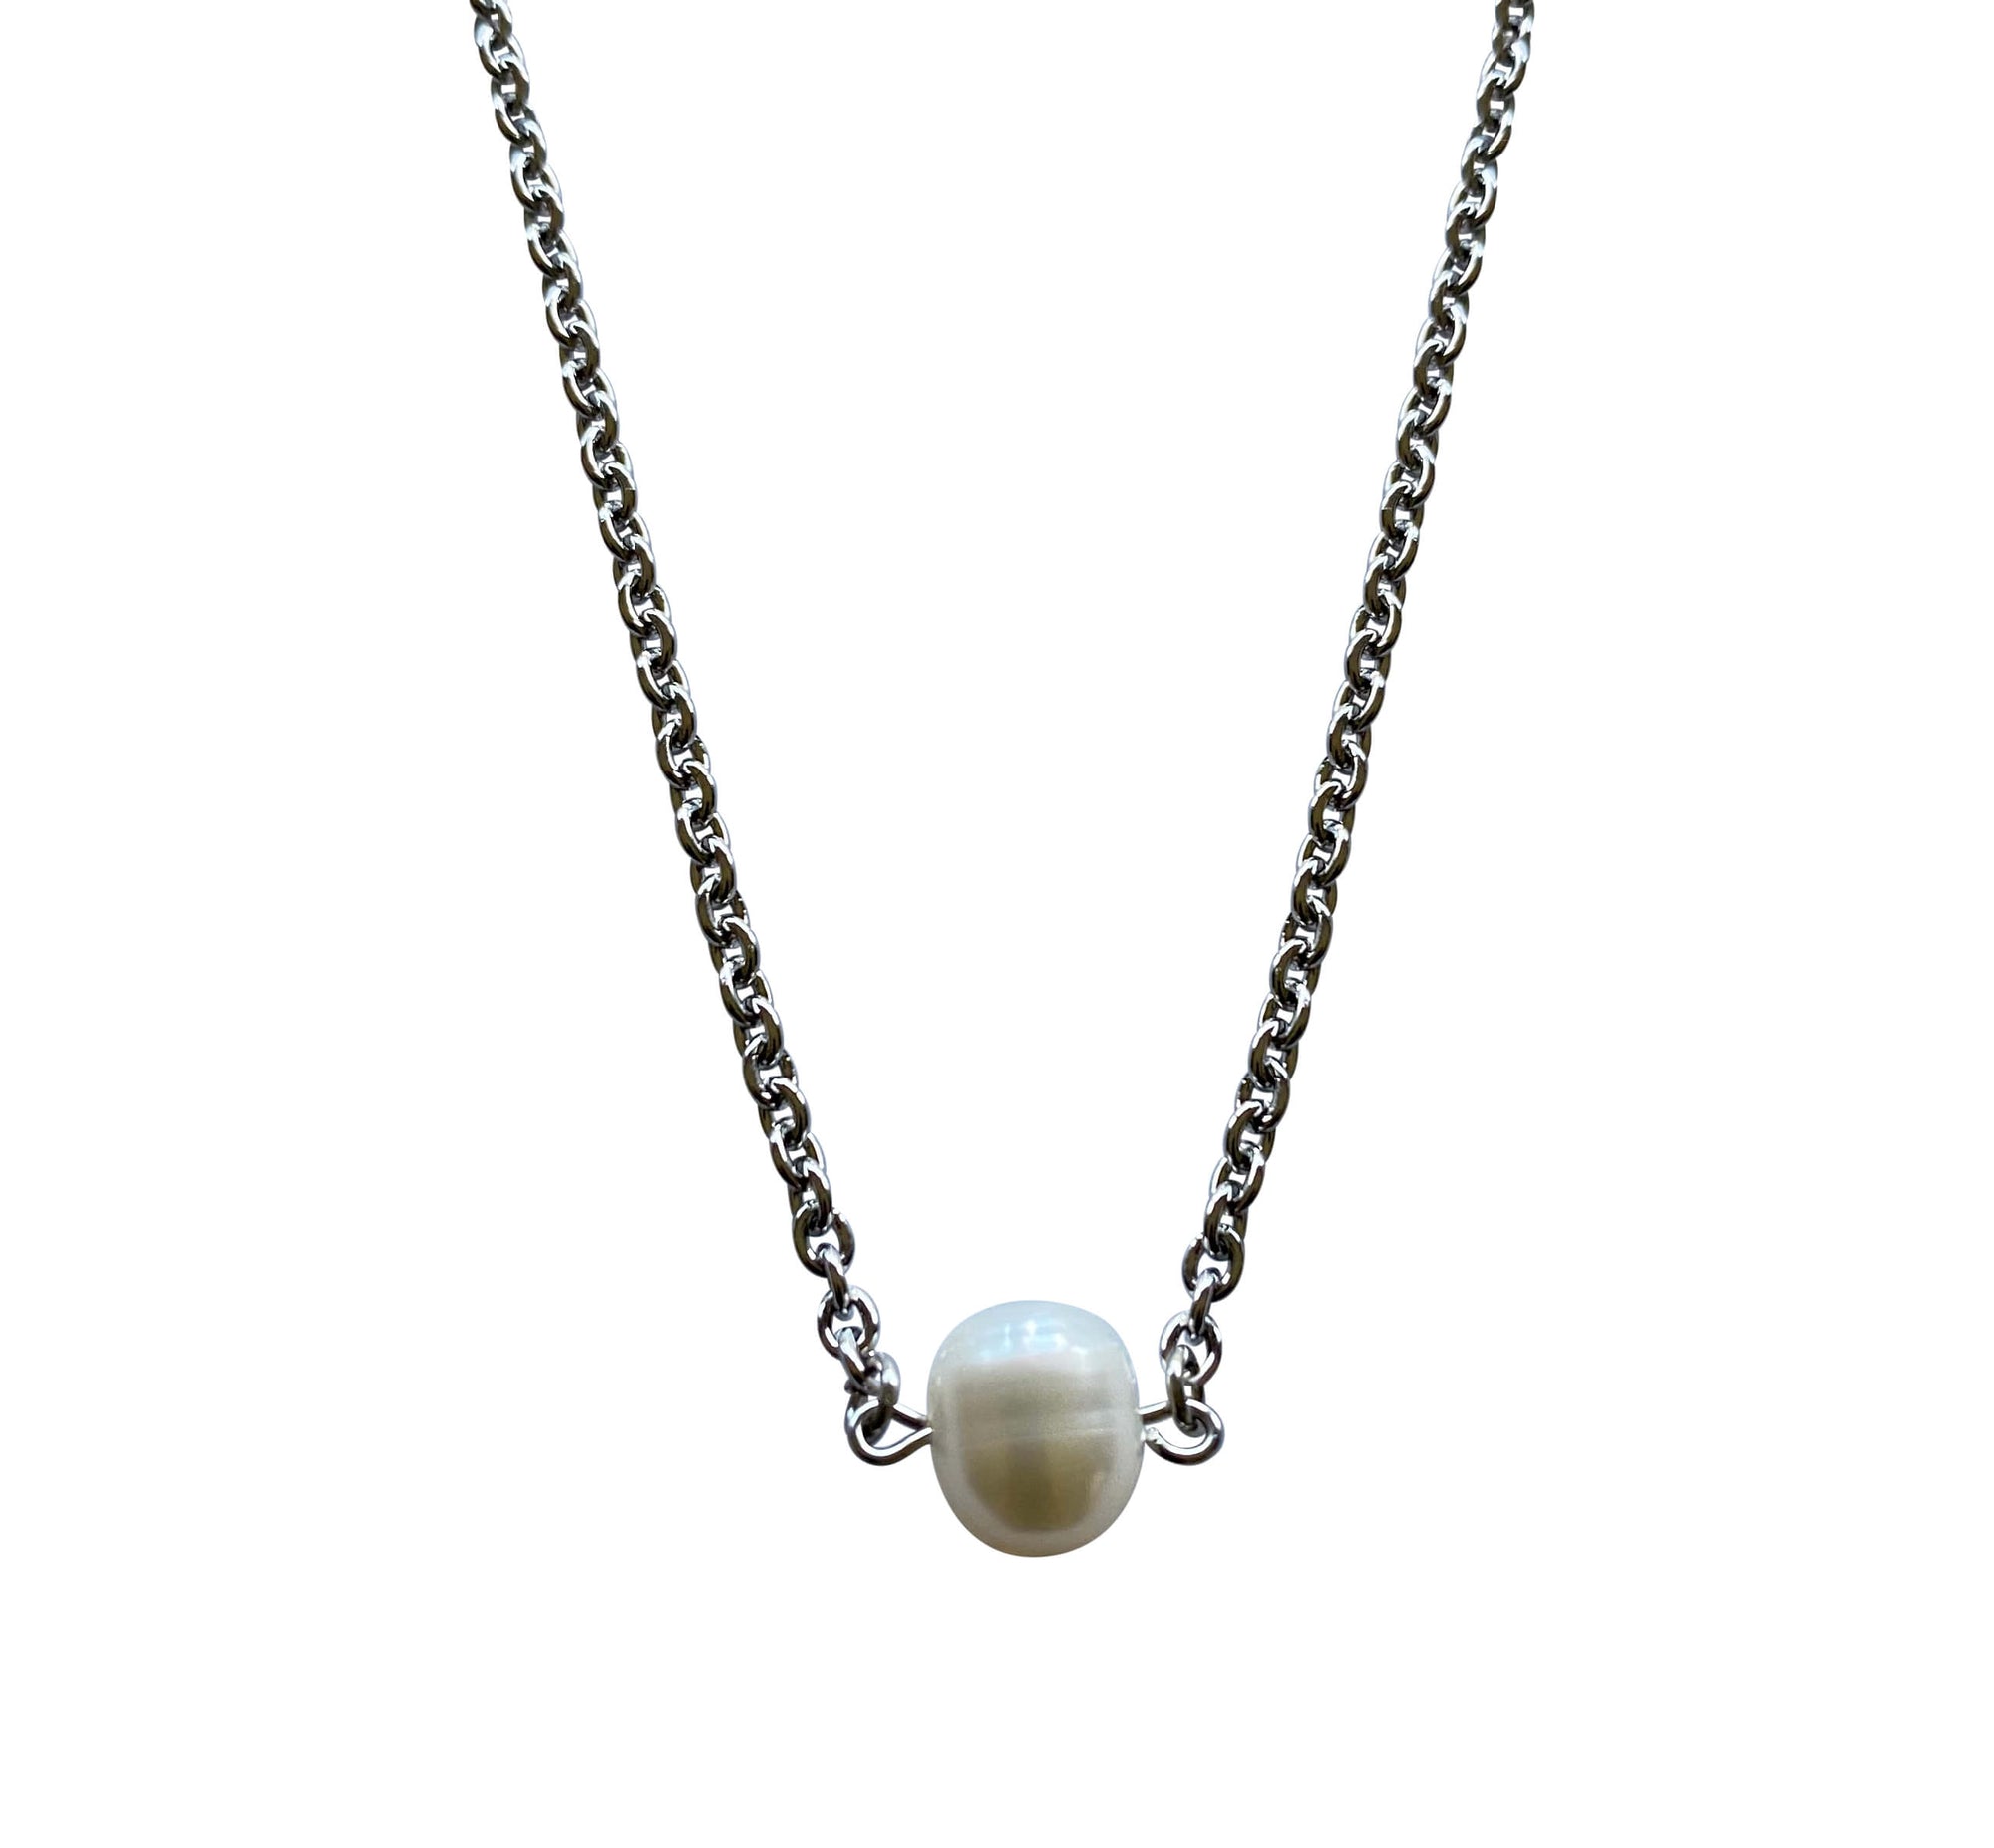 Single Round Freshwater Pearl Necklace with Stainless Steel Silver Chain-Necklaces- Creative Jewelry by Marcia